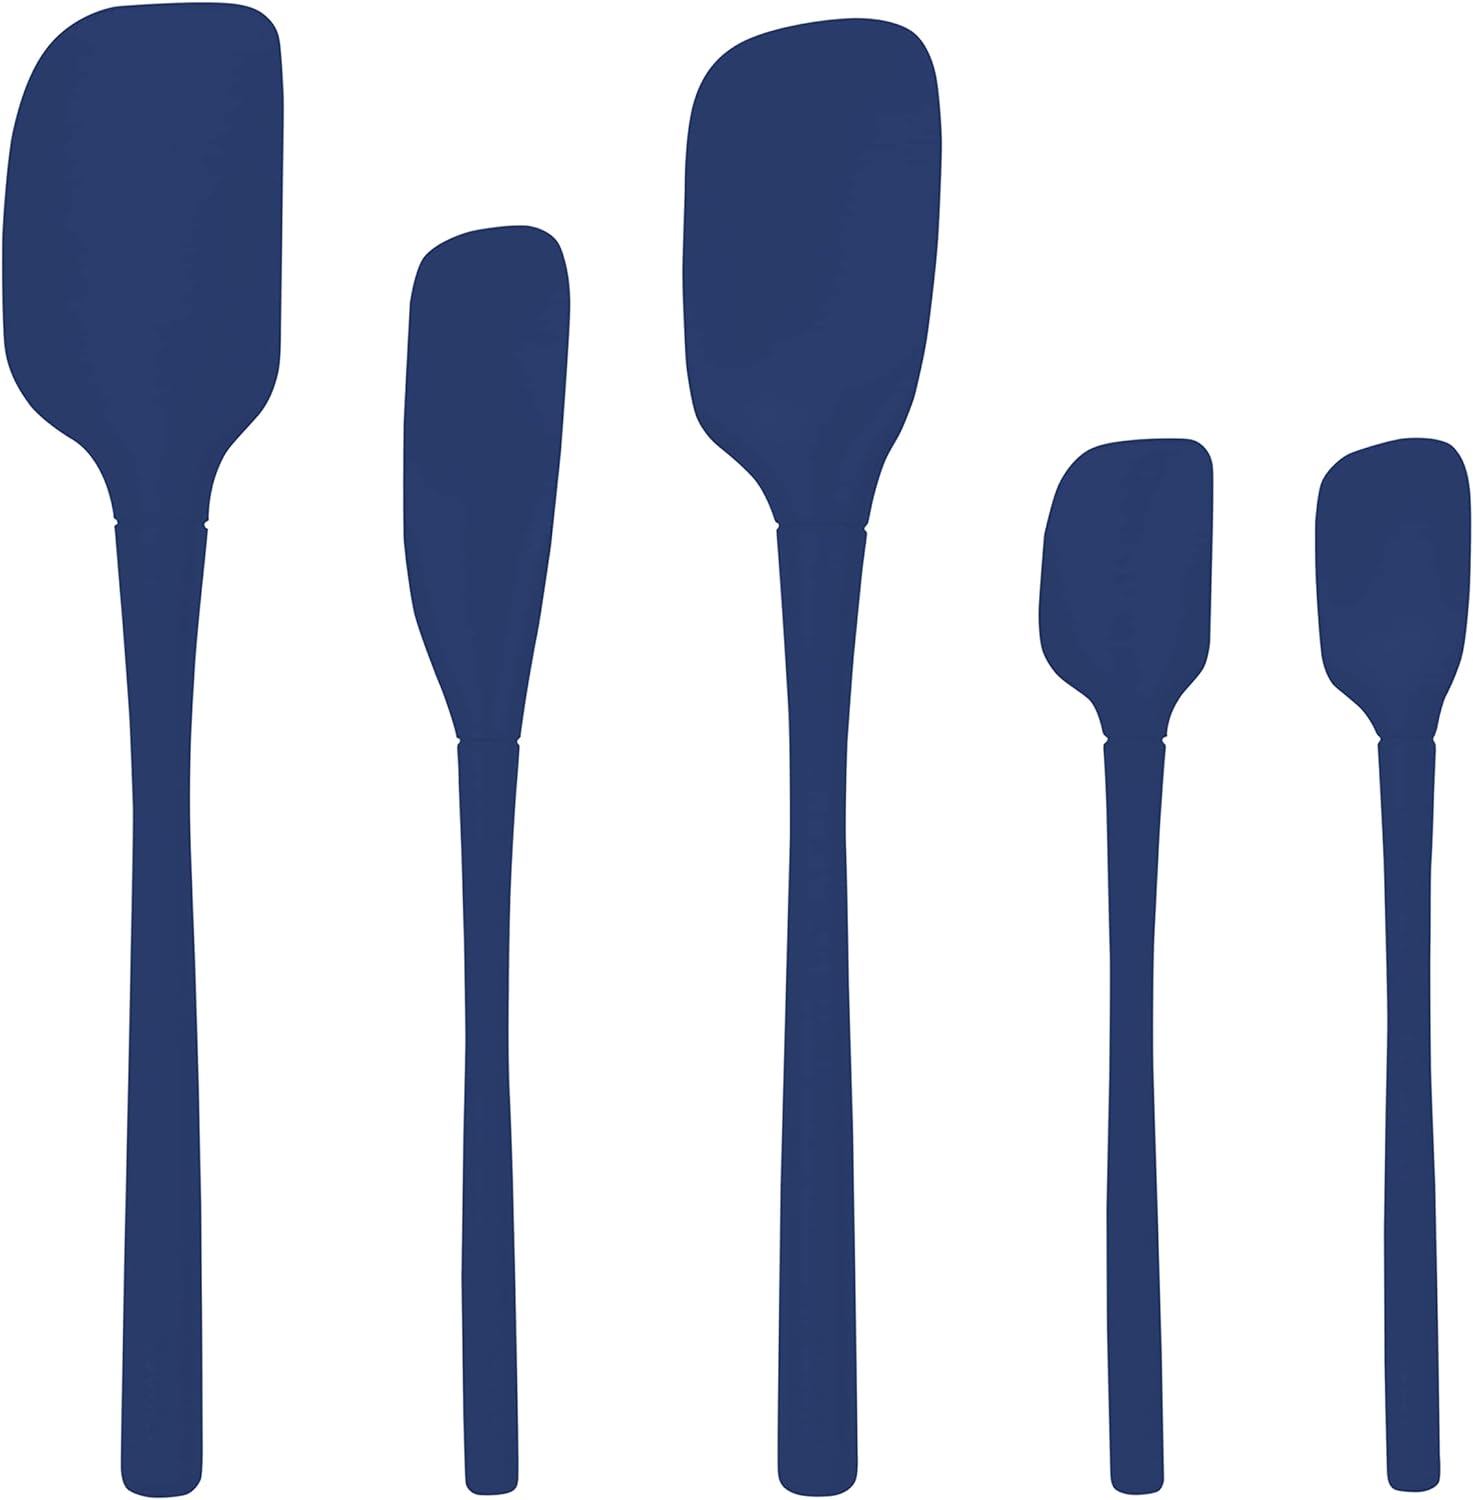 Tovolo Flex-Core All-Silicone Set of 5 Spatulas (Deep Indigo) – Kitchen Utensils & Gadgets Essential for Baking, Cooking, Grilling, Apartment, & New Home/BPA-Free & Dishwasher-Safe